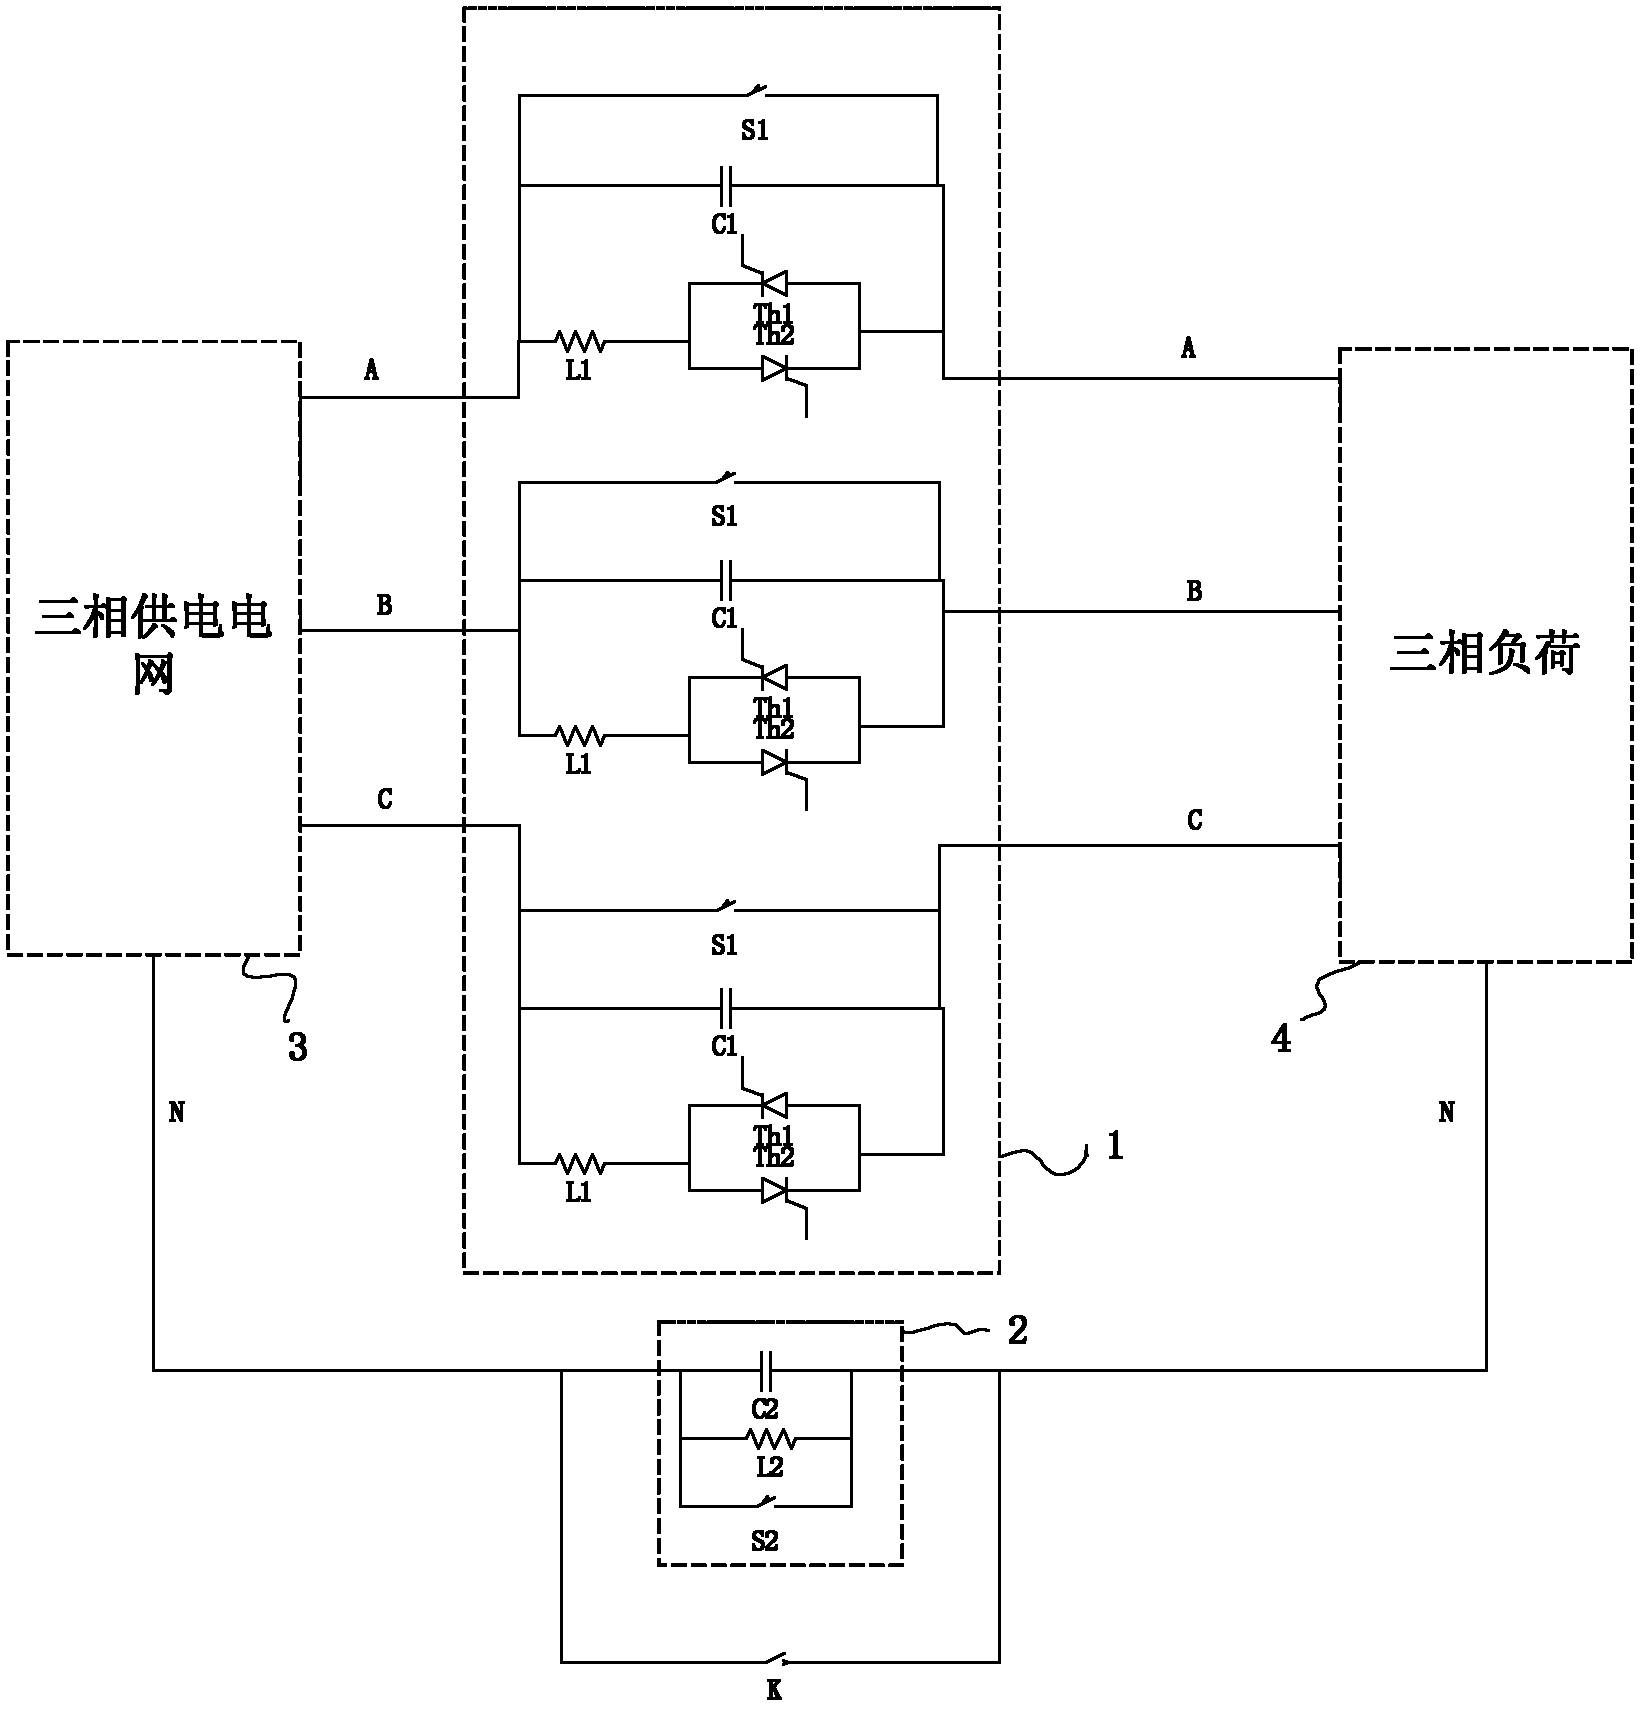 Power saving device with harmonic suppression and voltage stabilization functions